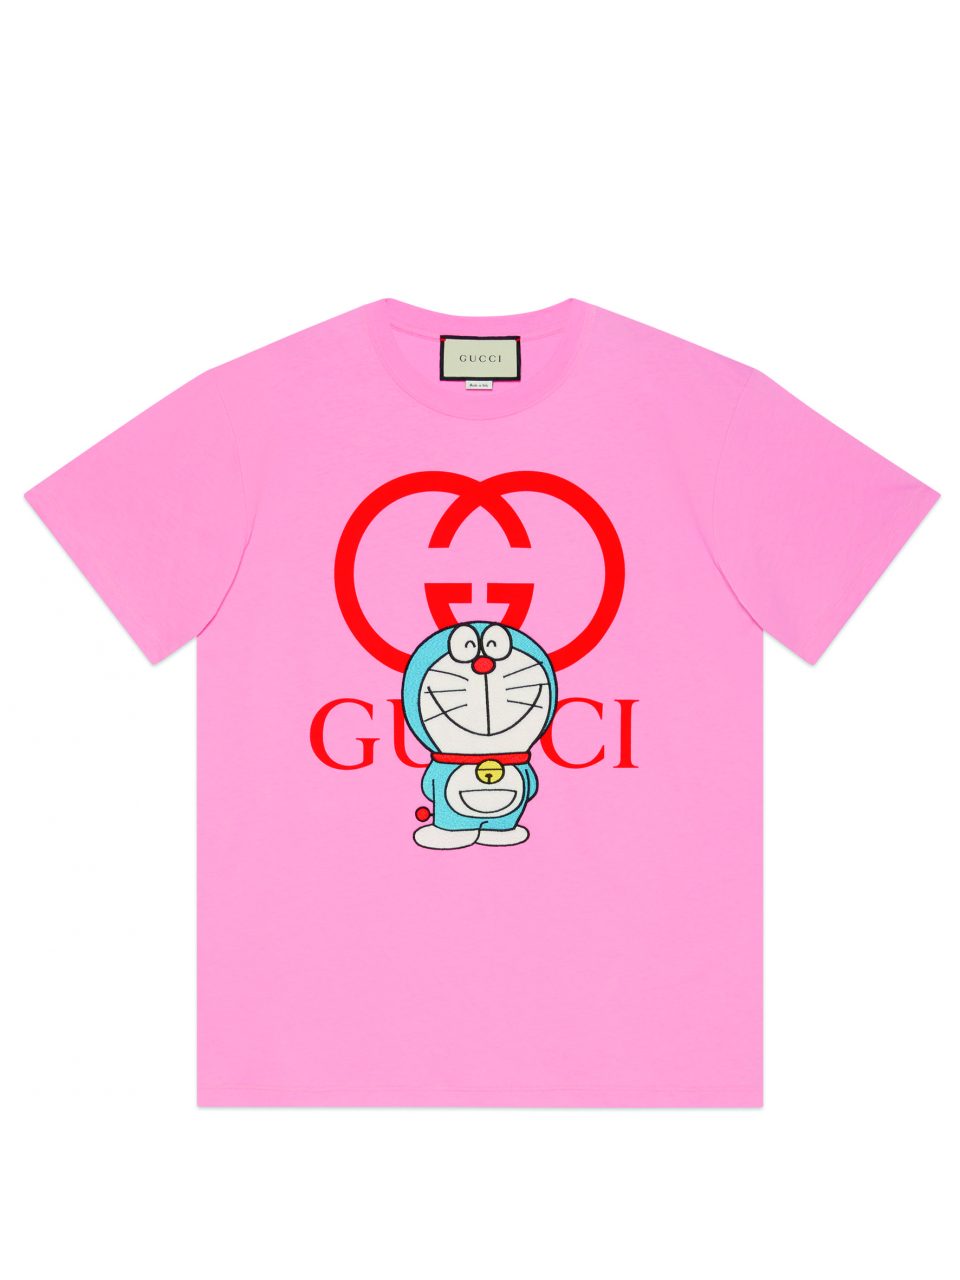 Gucci 'Taps' Doraemon for Chinese New Year Capsule – WWD